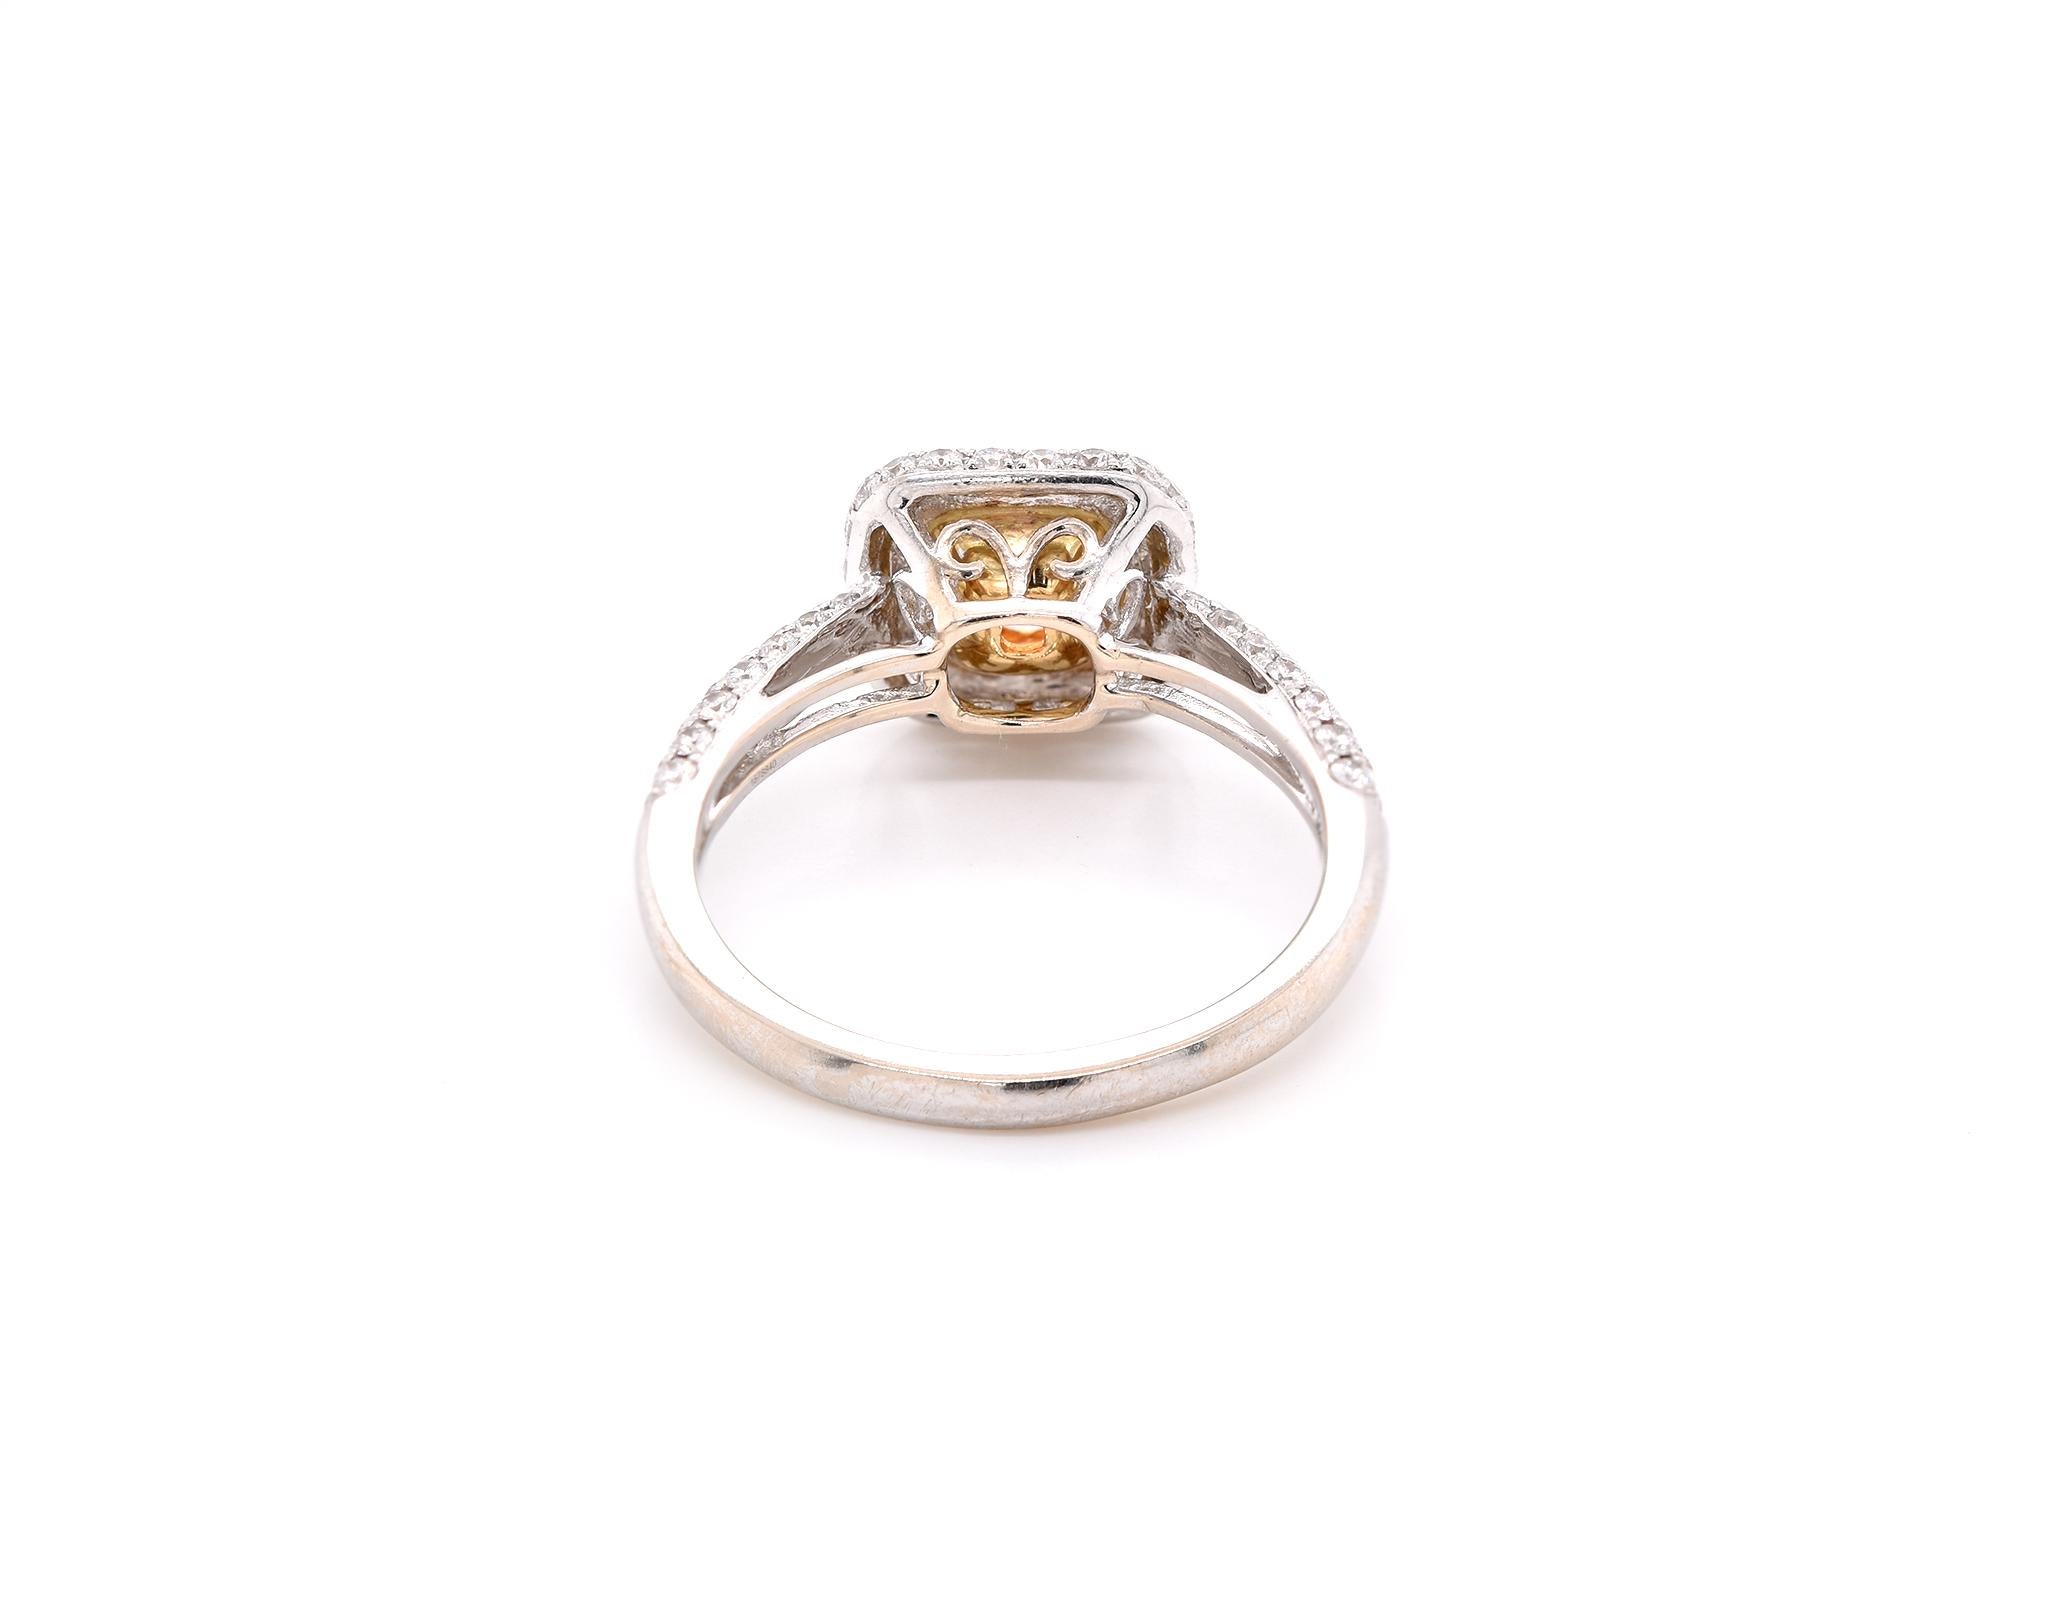 18 Karat White Gold Fancy Yellow Diamond Engagement Ring In Excellent Condition For Sale In Scottsdale, AZ